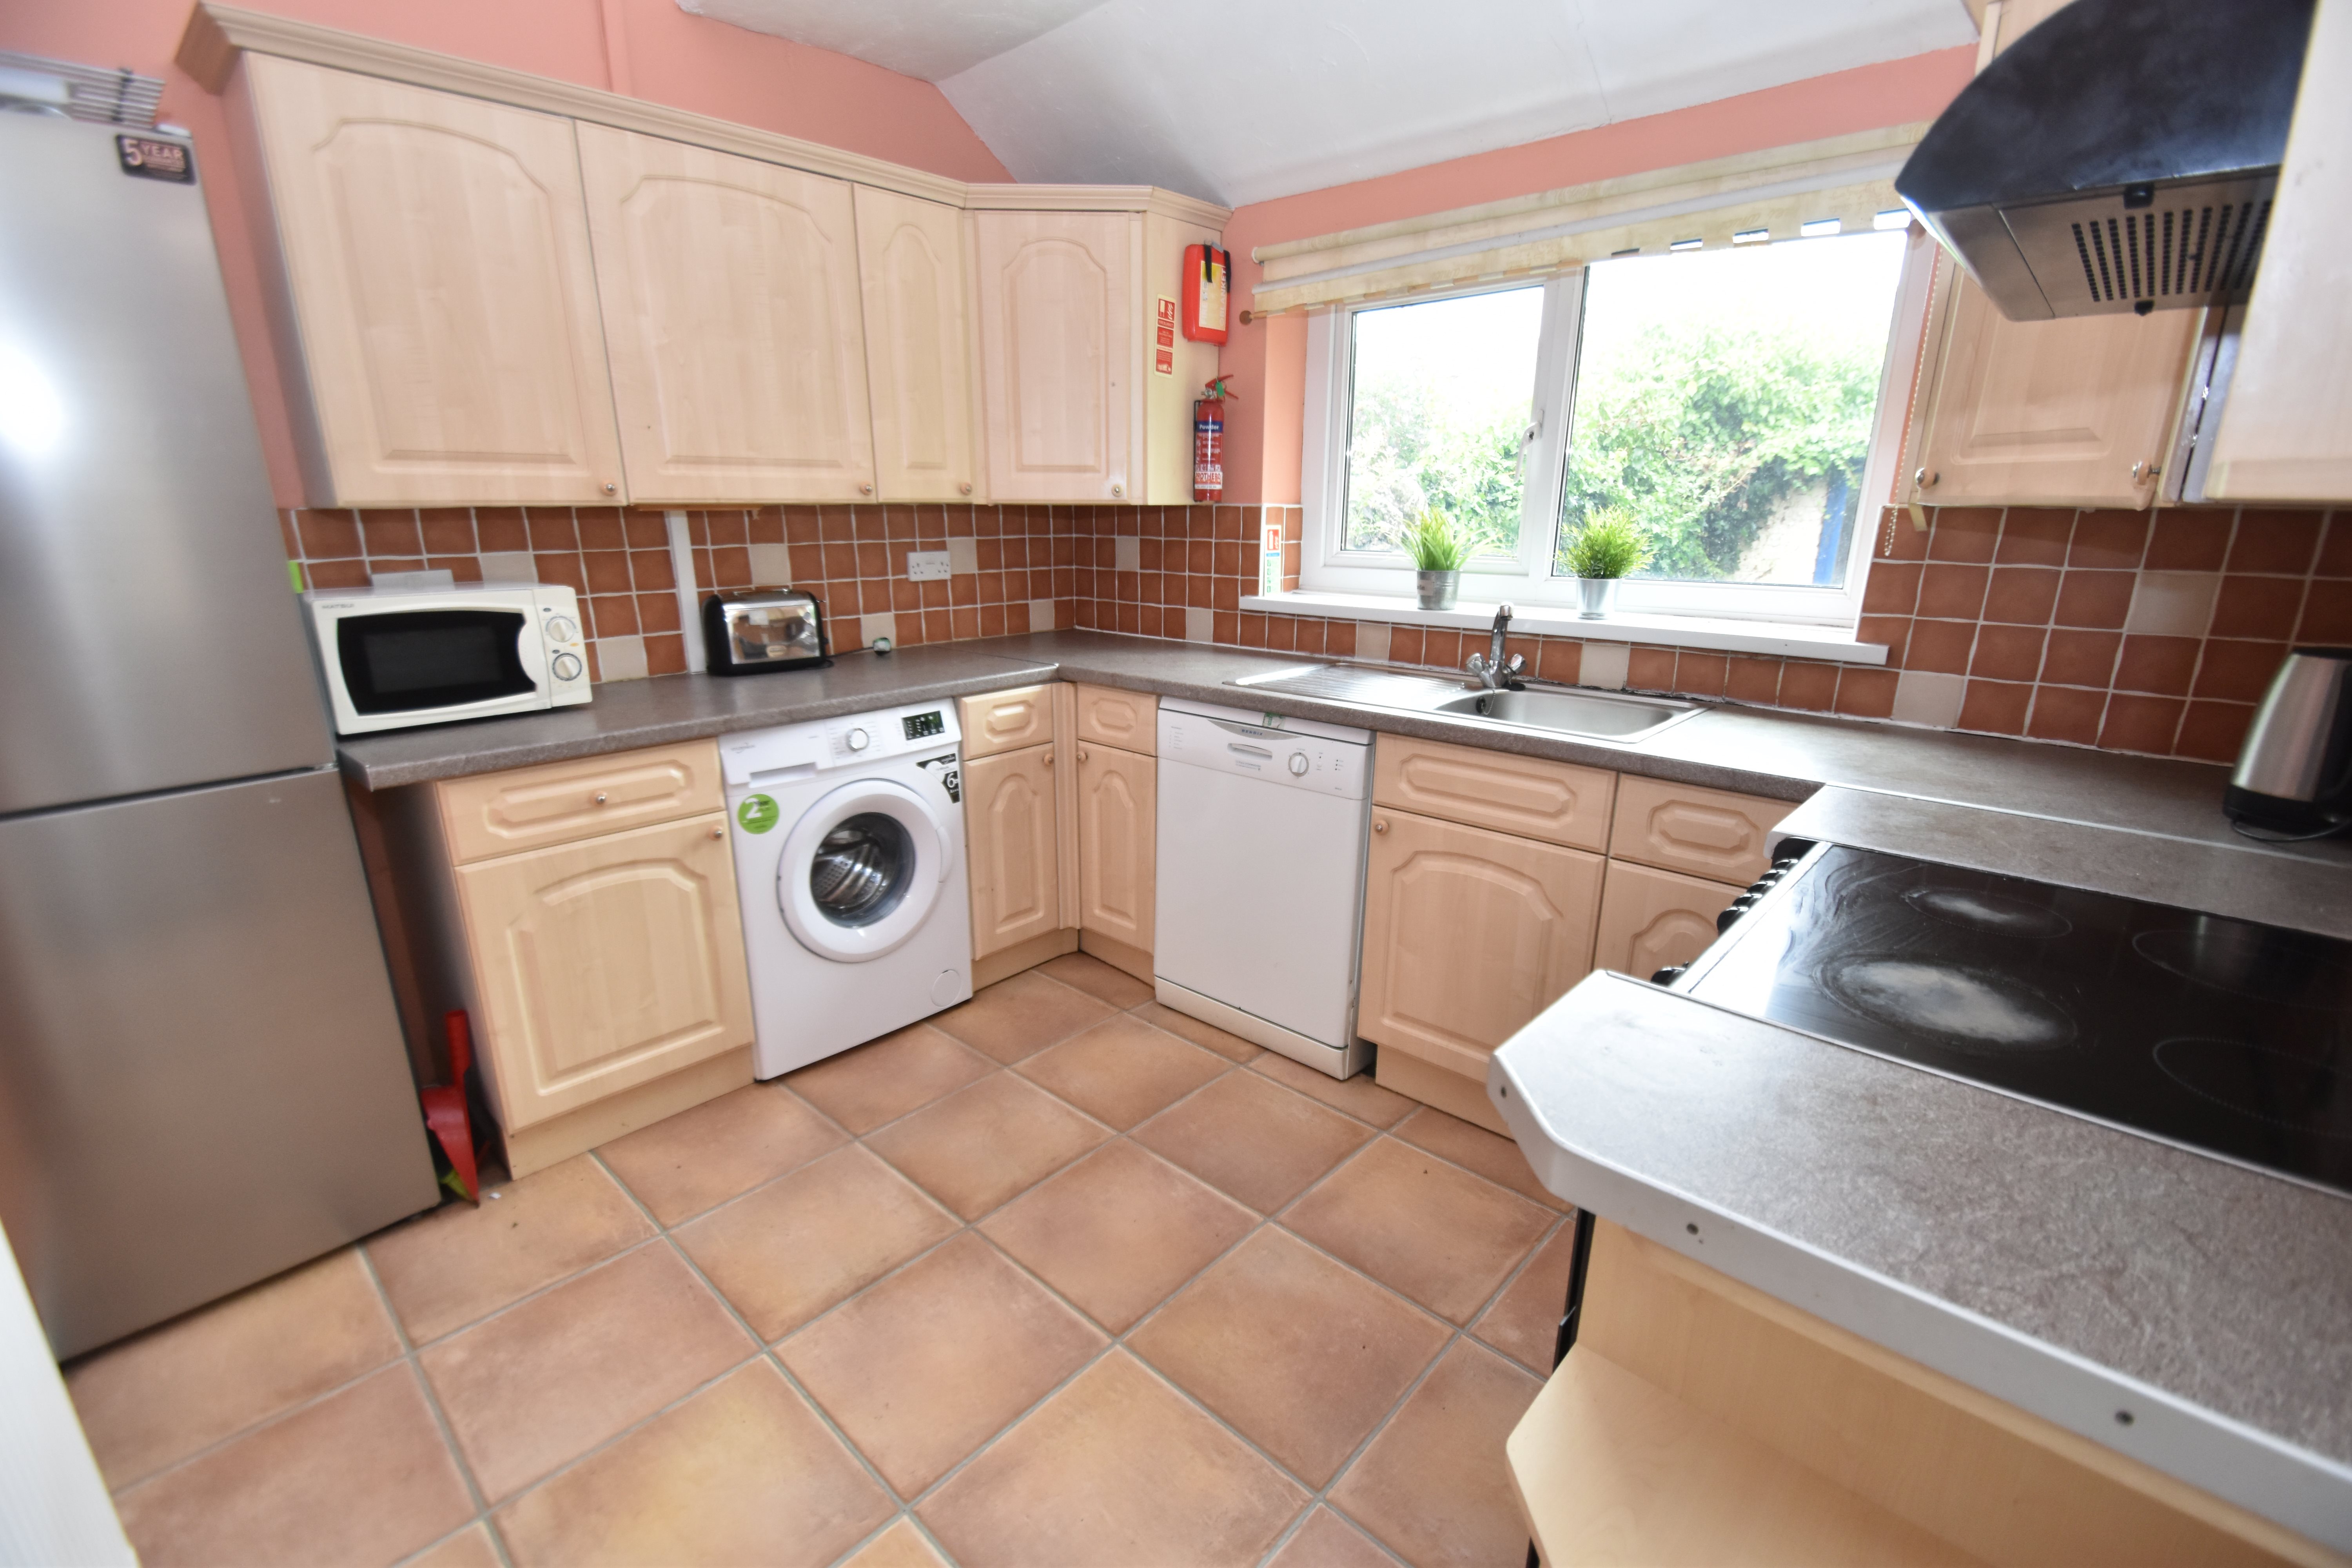 4 bed house to rent in Lisvane Street, Cathays 6